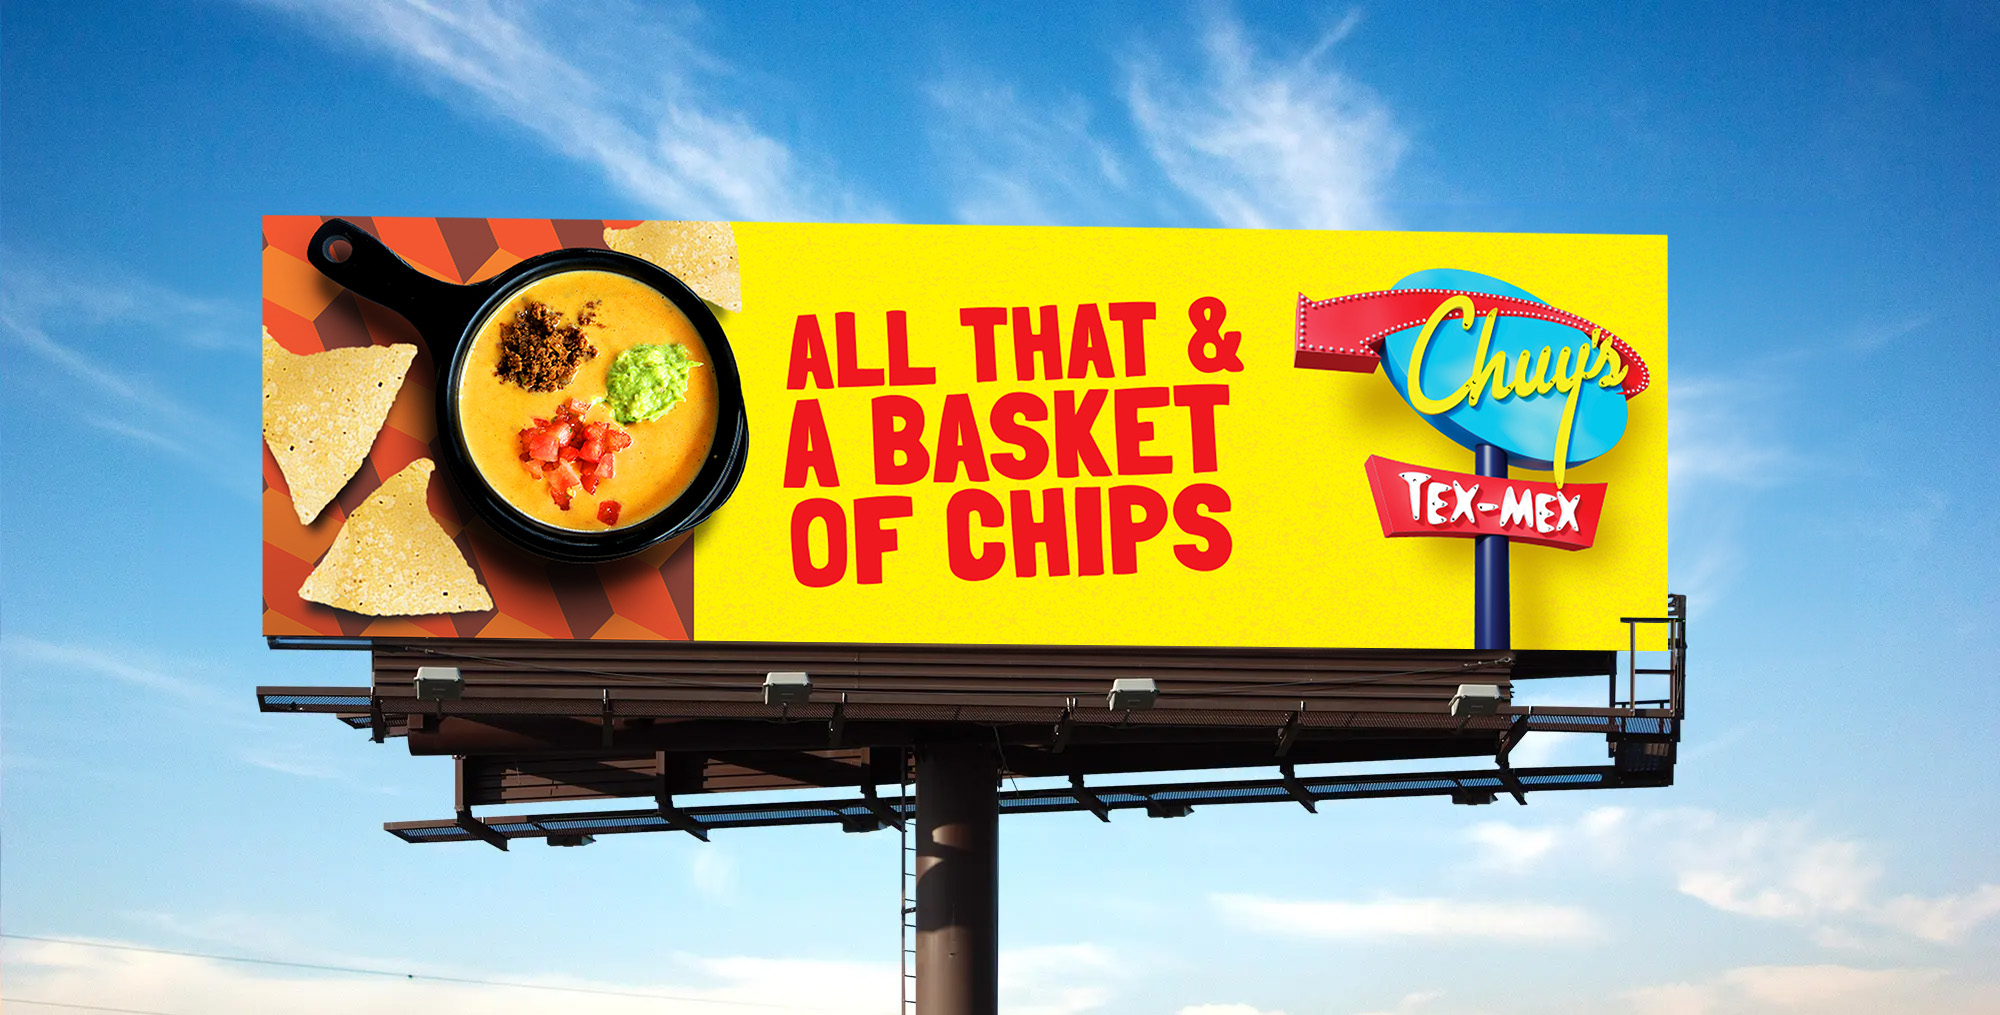 Chuy's billboard that reads "All that and a baskey of chips"